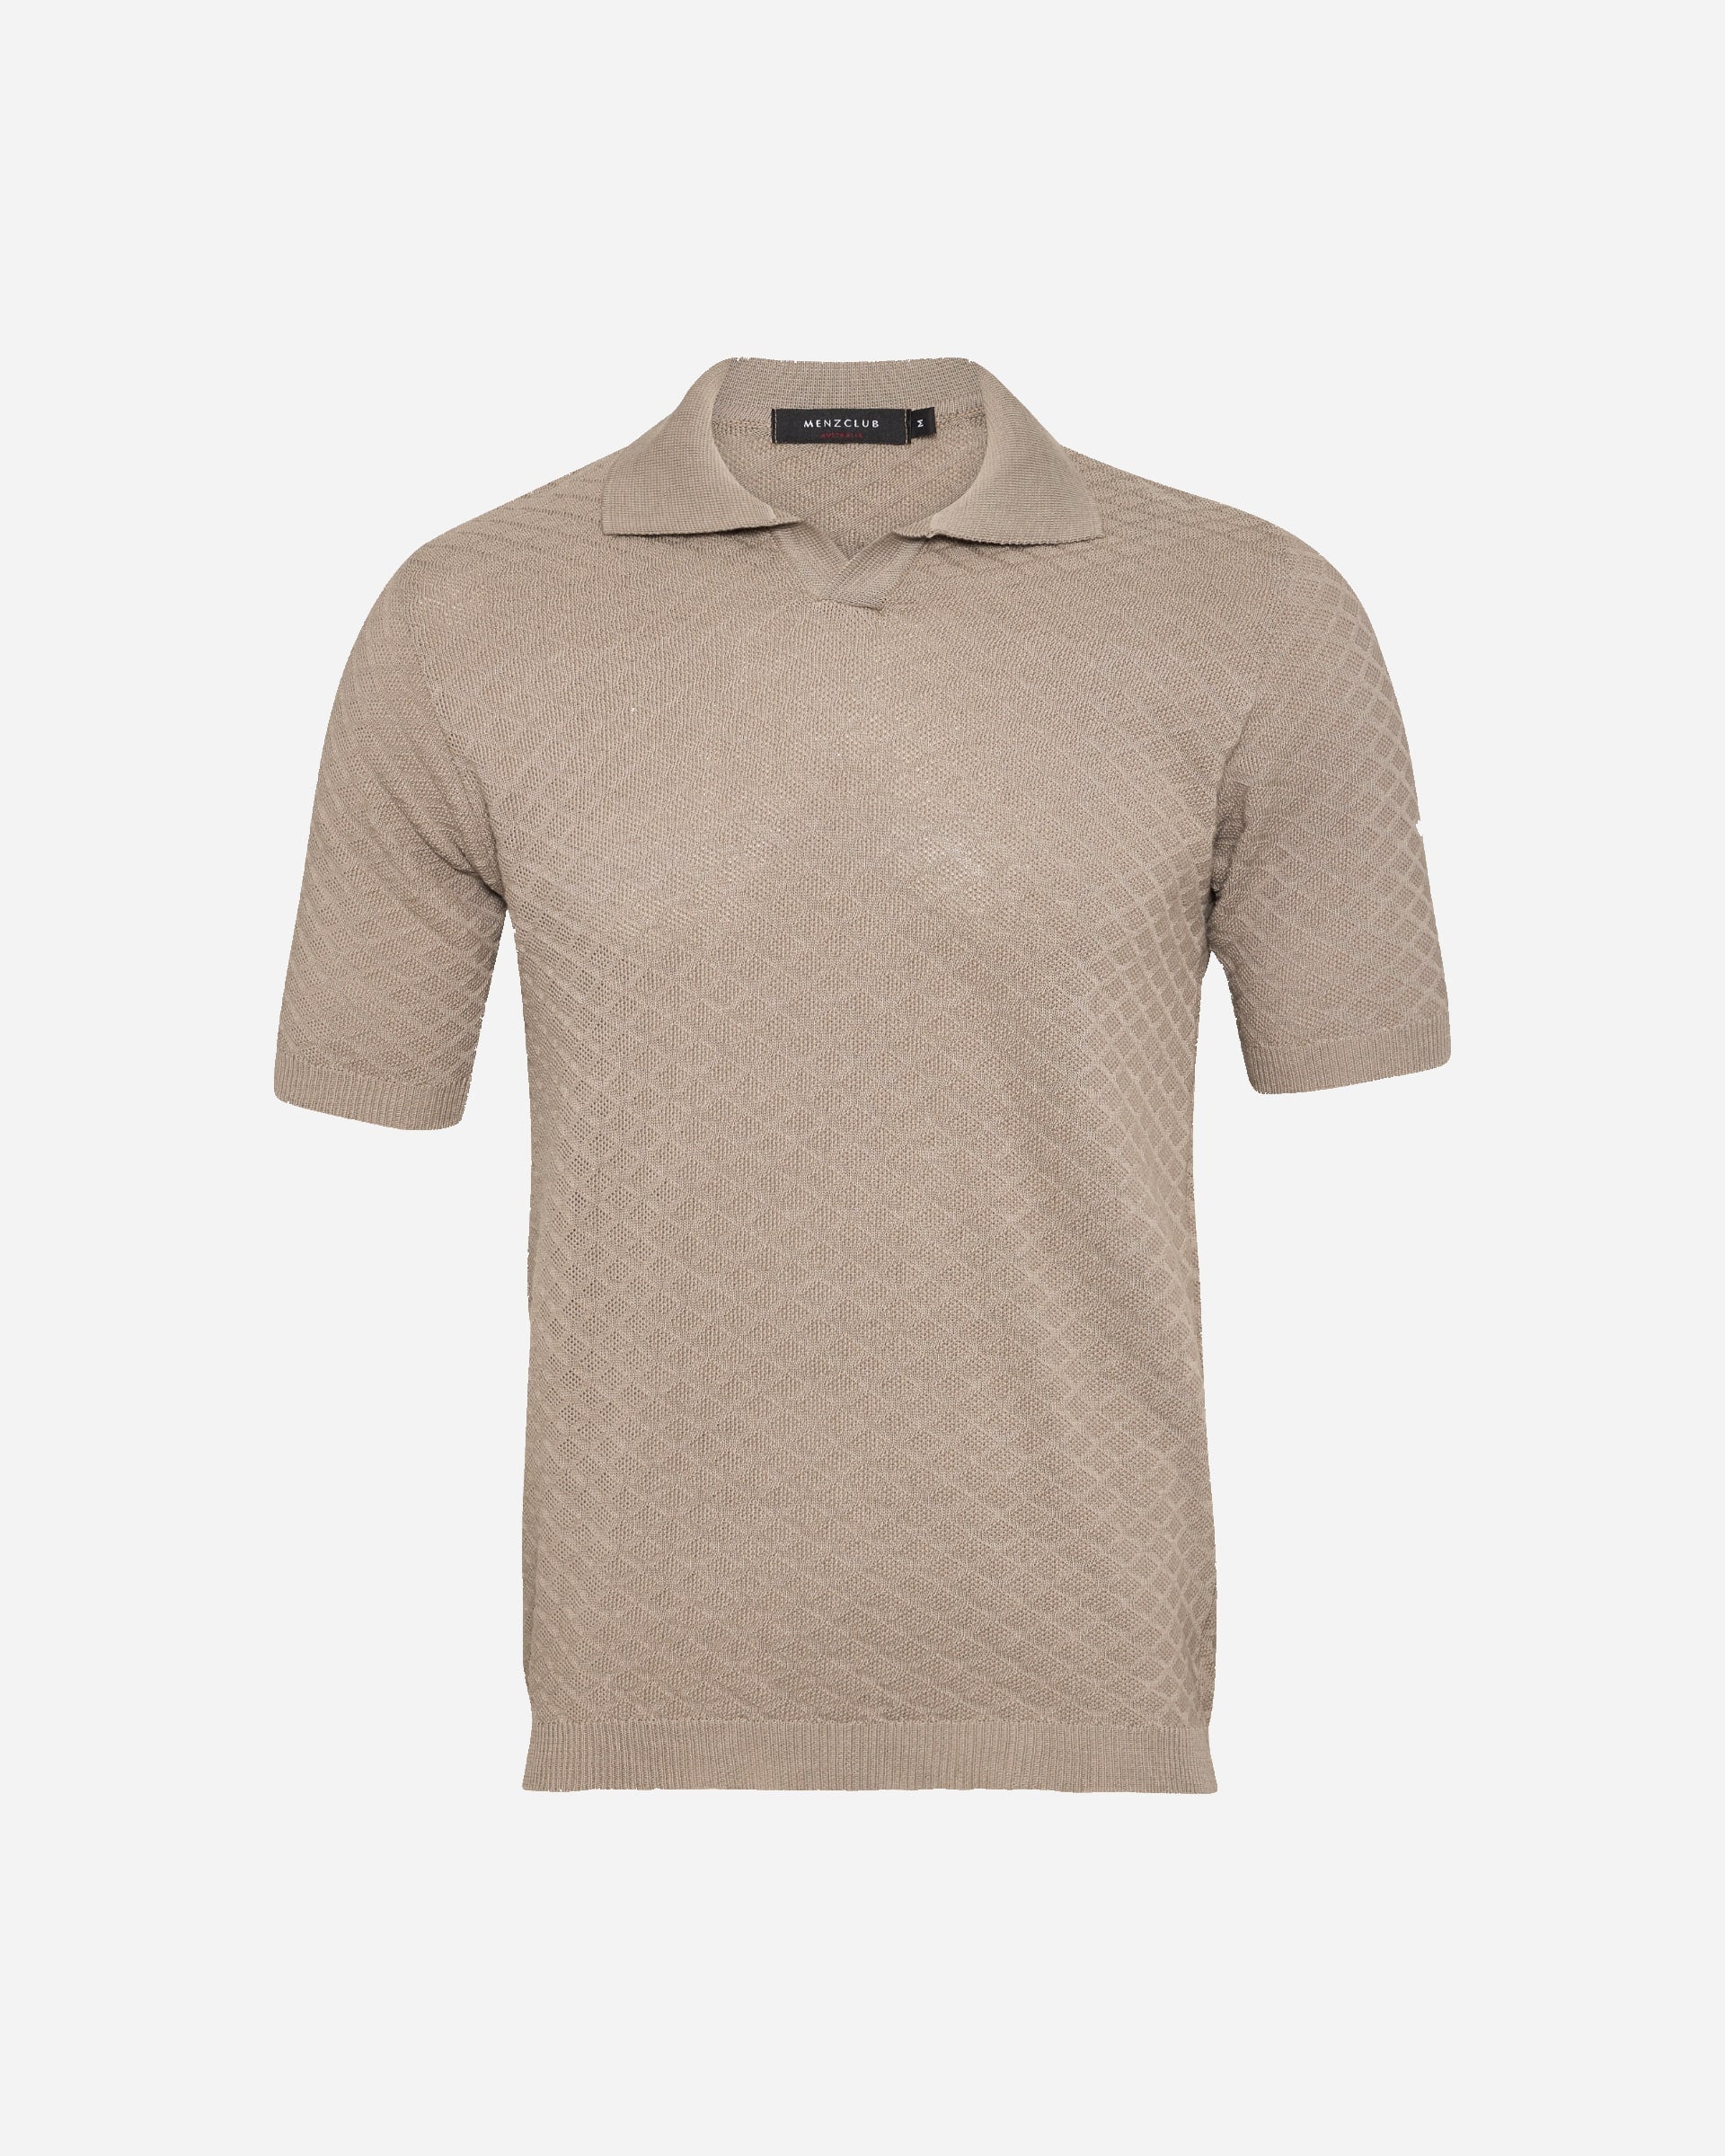 Argyle Knitted Polo - Men's Polo Shirts at Menzclub